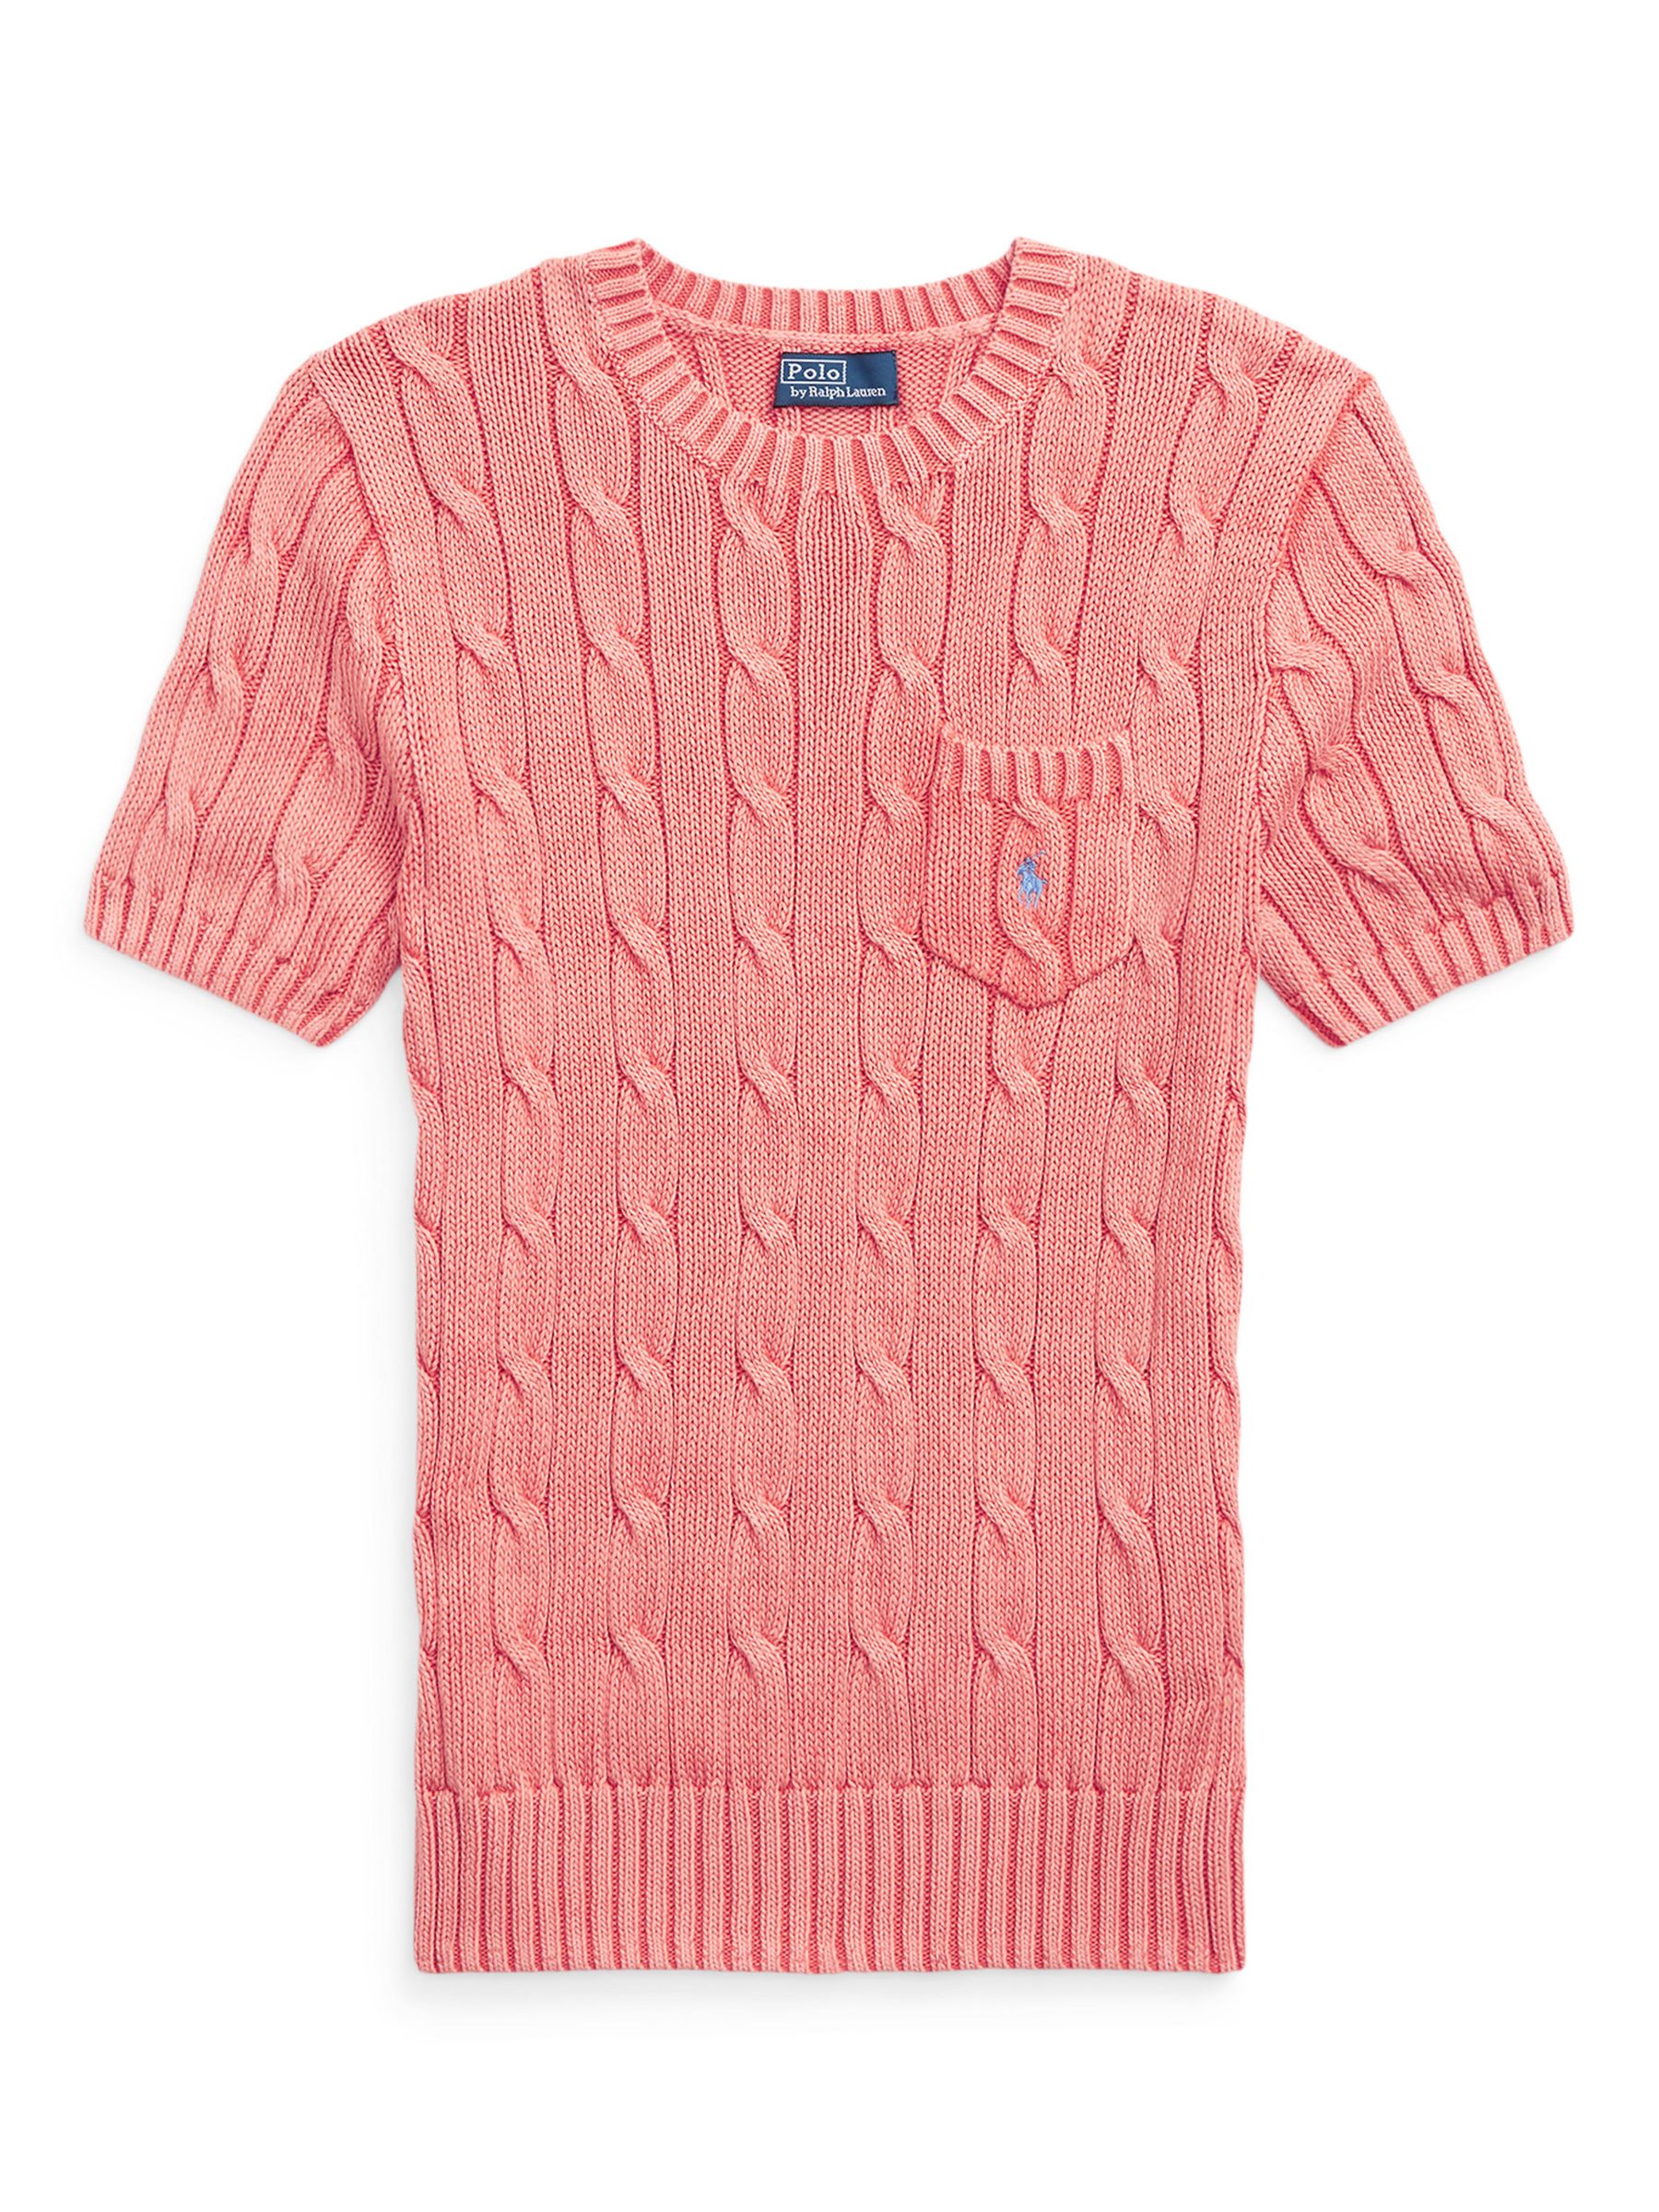 Buy Polo Ralph Lauren Cable Knit Short Sleeve Jumper, Cotton Rose Online at johnlewis.com